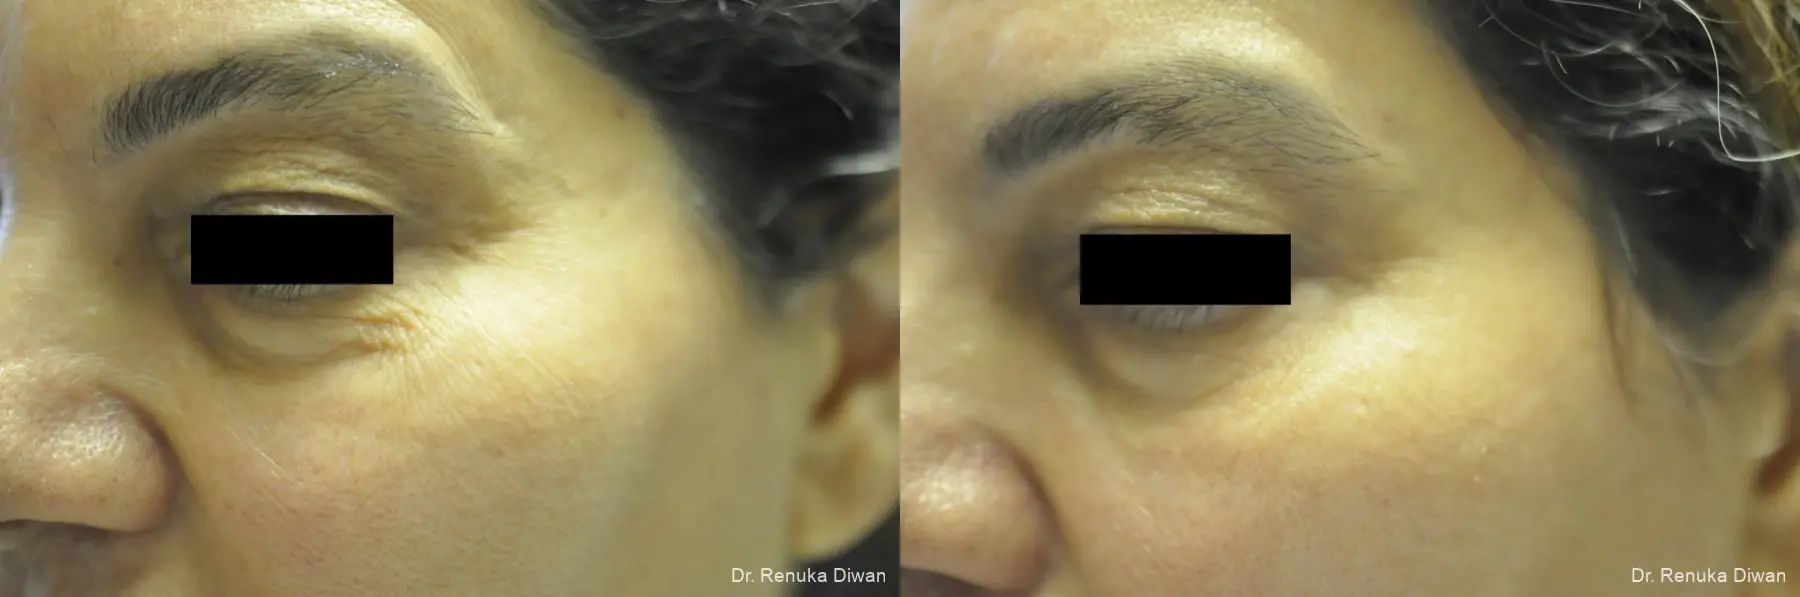 Crows Feet Creases: Patient 7 - Before and After 1